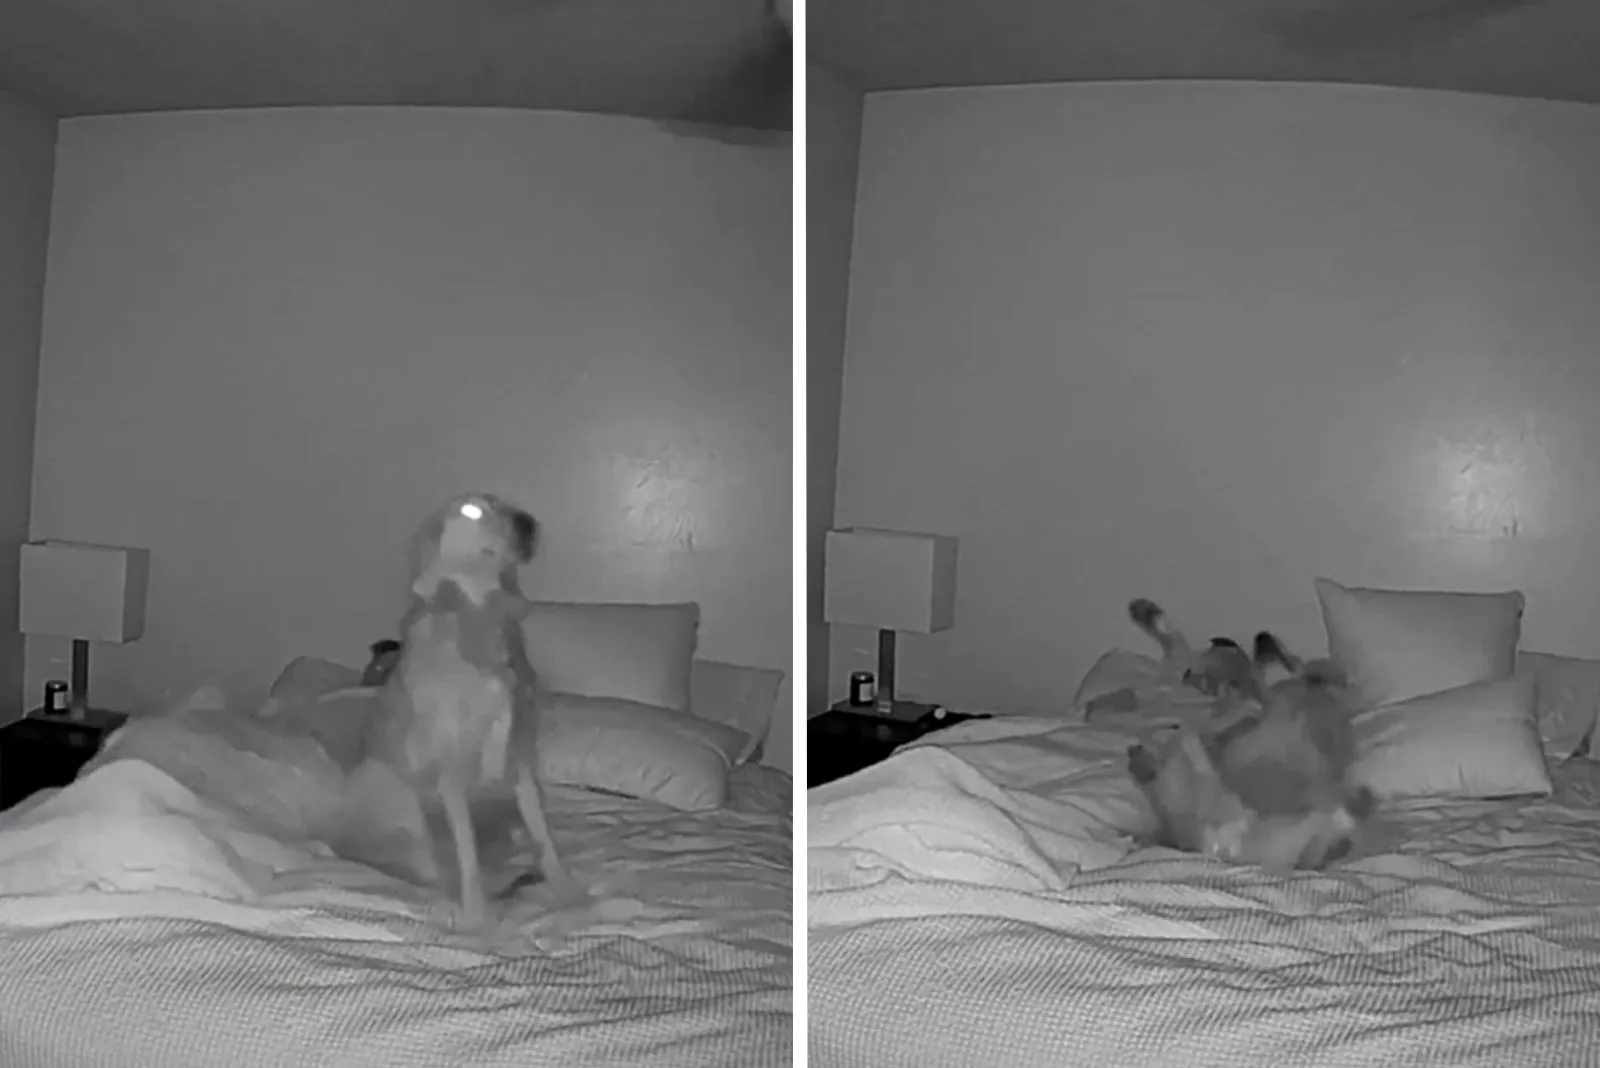 security camera footage of a dog doing the sweetest thing